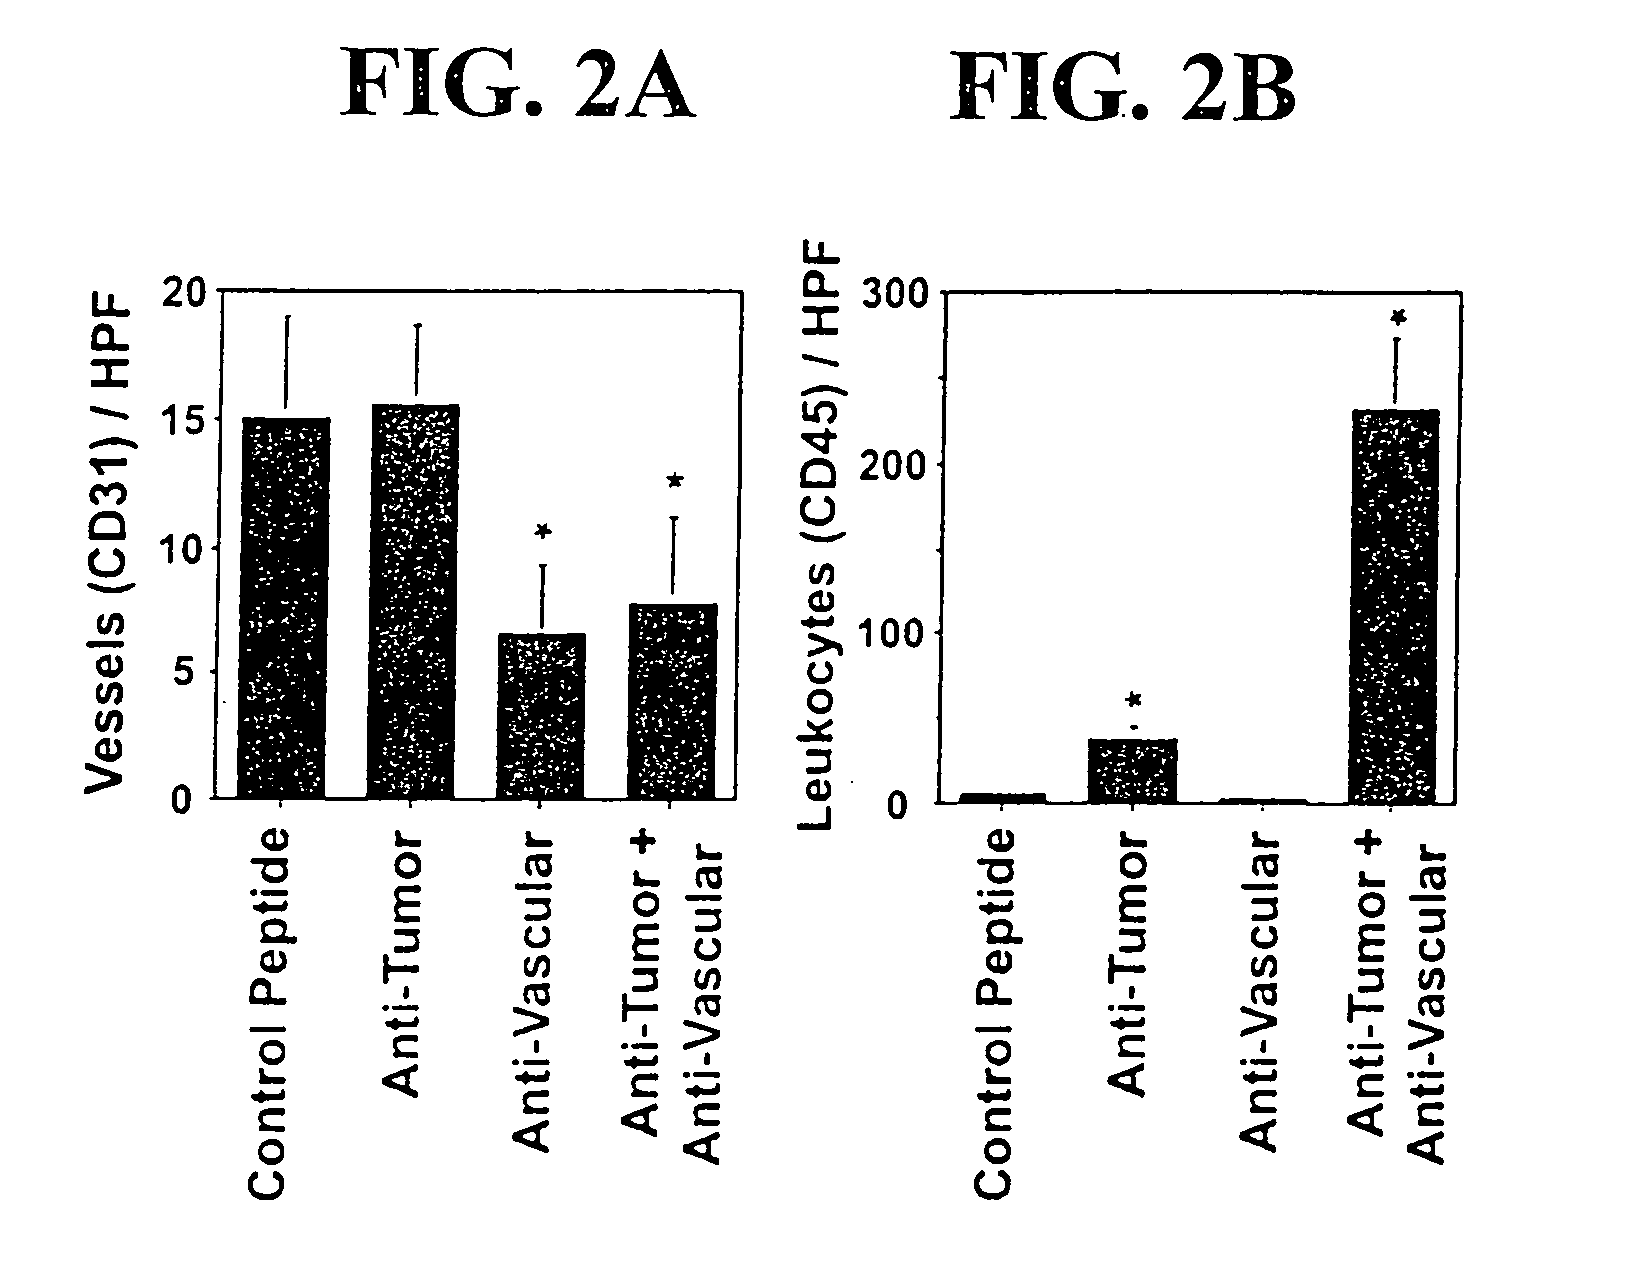 Methods for treatment of tumors and metastases using a combination of anti-angiogenic and immuno therapies